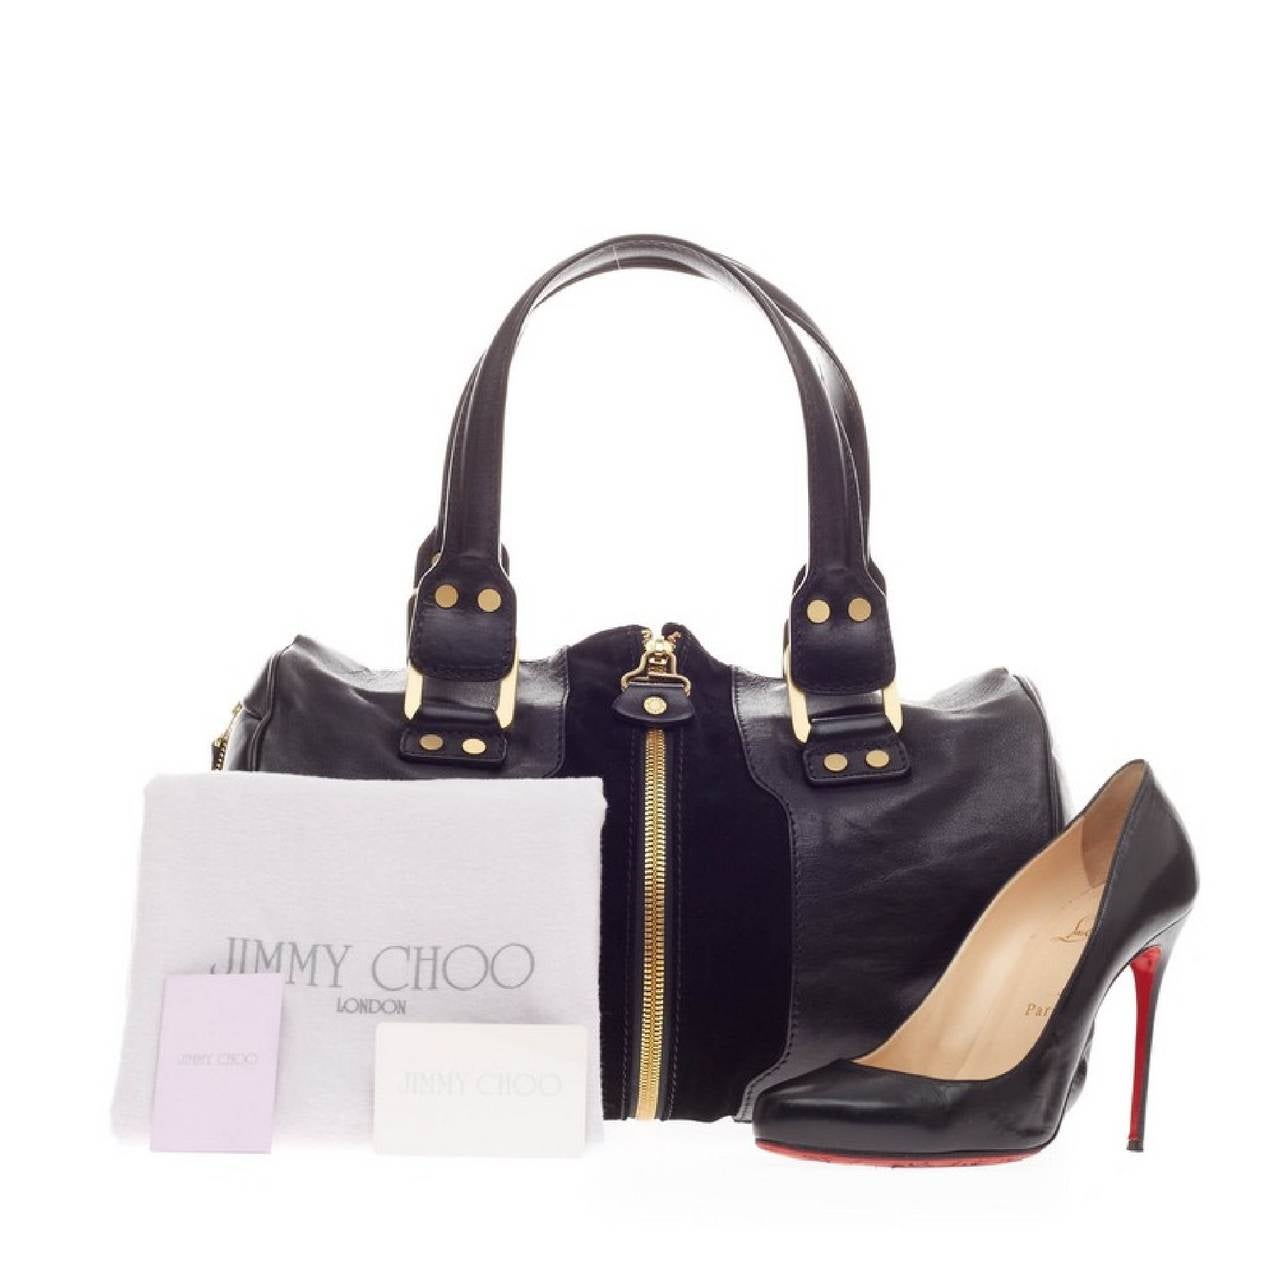 This authentic Jimmy Choo Marla Bag Leather is your stylish everyday bag. Crafted in black leather with suede center panels, this simple yet edgy bag features dual-rolled handles, a center zip closure that adjusts for expansion, side zip pockets and